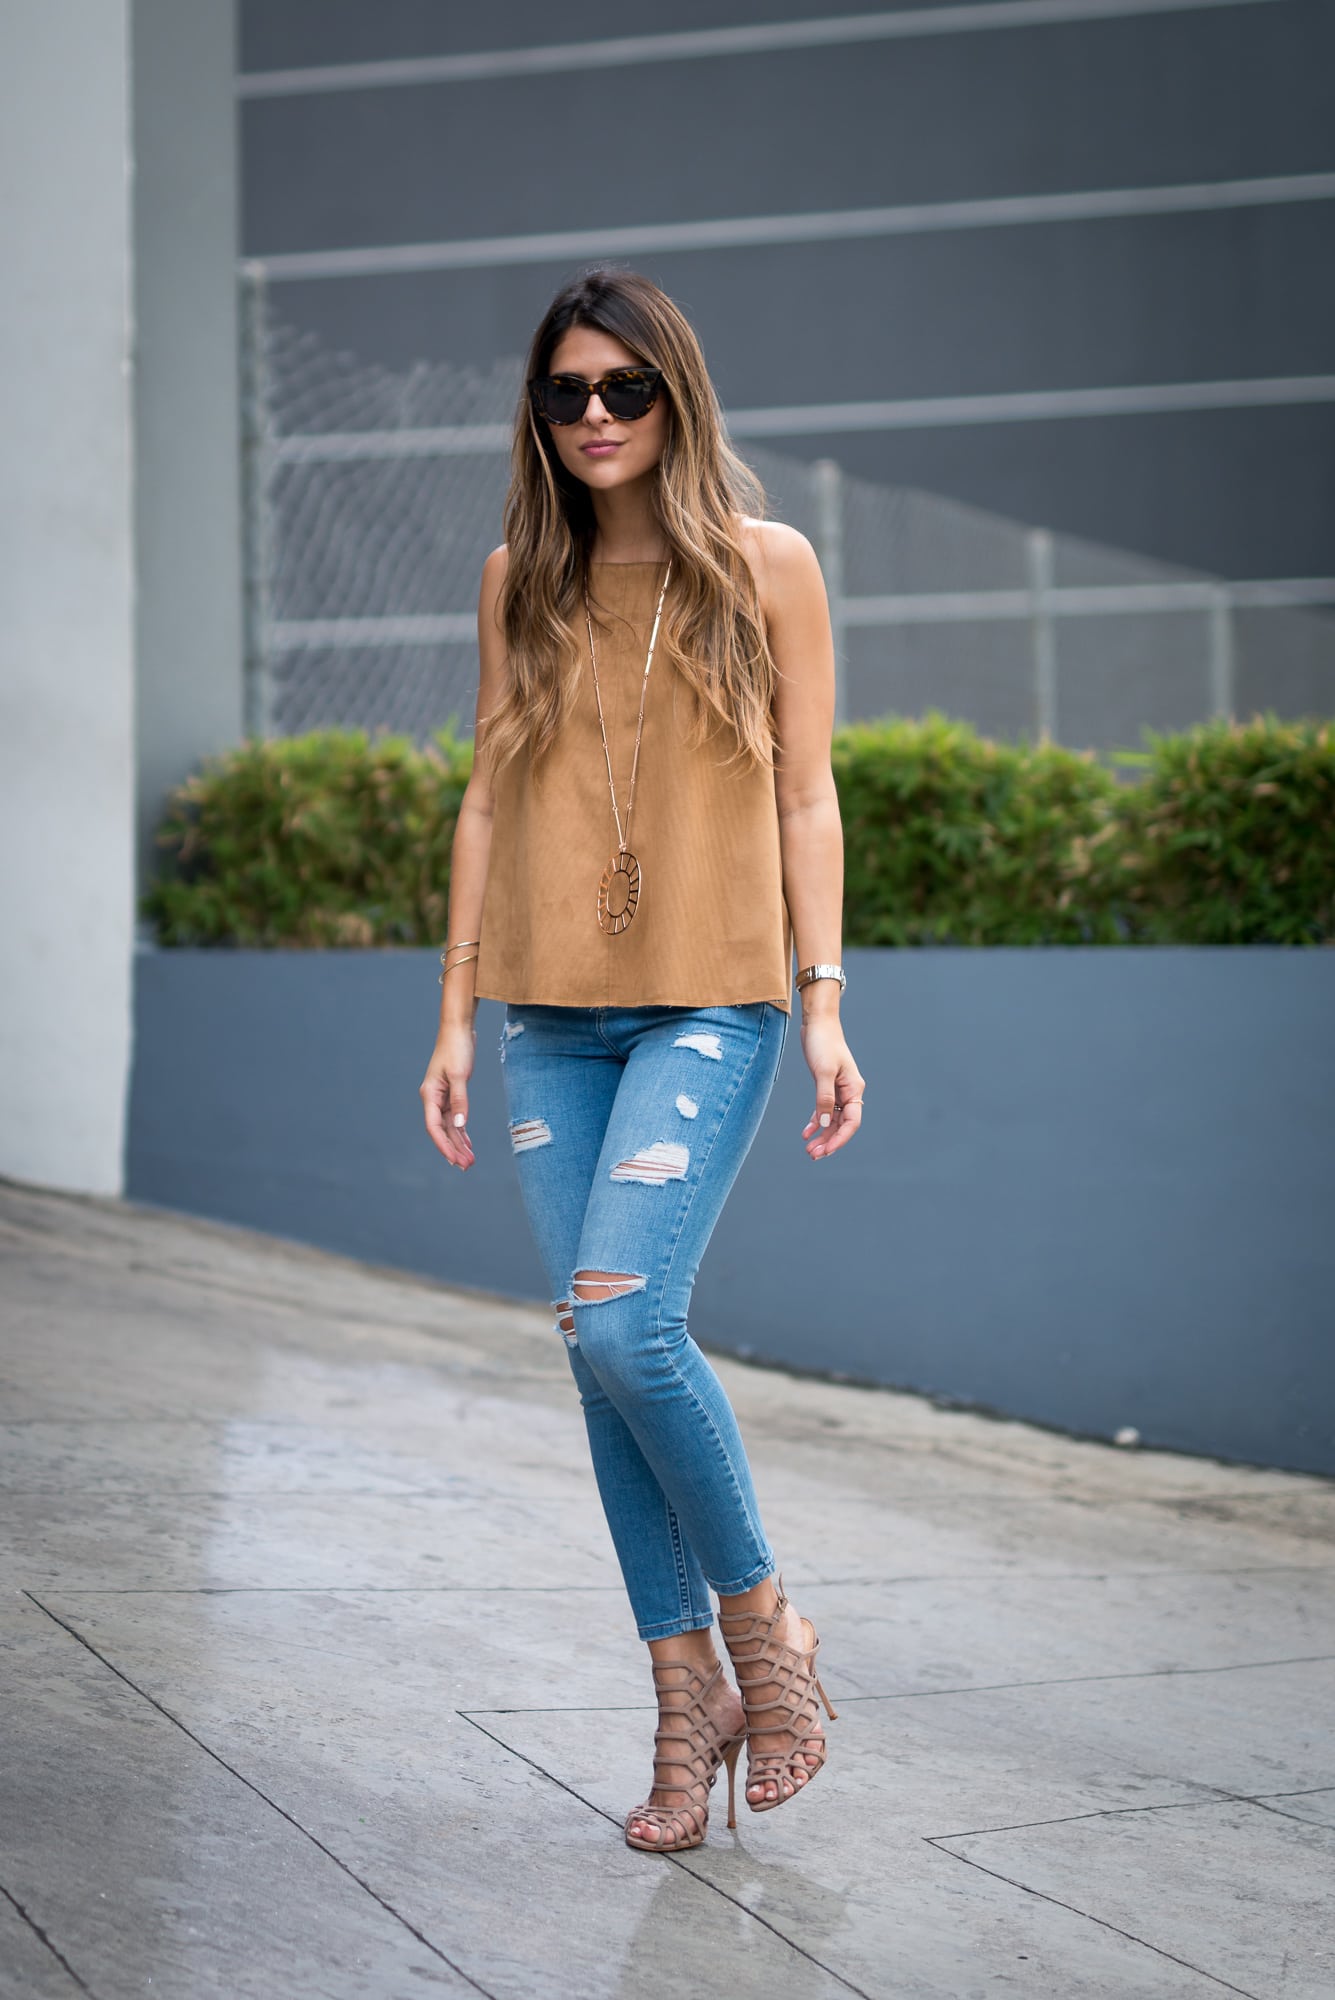 Topshop-Suede-Top-Moto-High-Rise-Ripped-Jeans-Schutz-Juliana-Caged-Sandals-Pam-Hetlinger-The-Girl-From-Panama